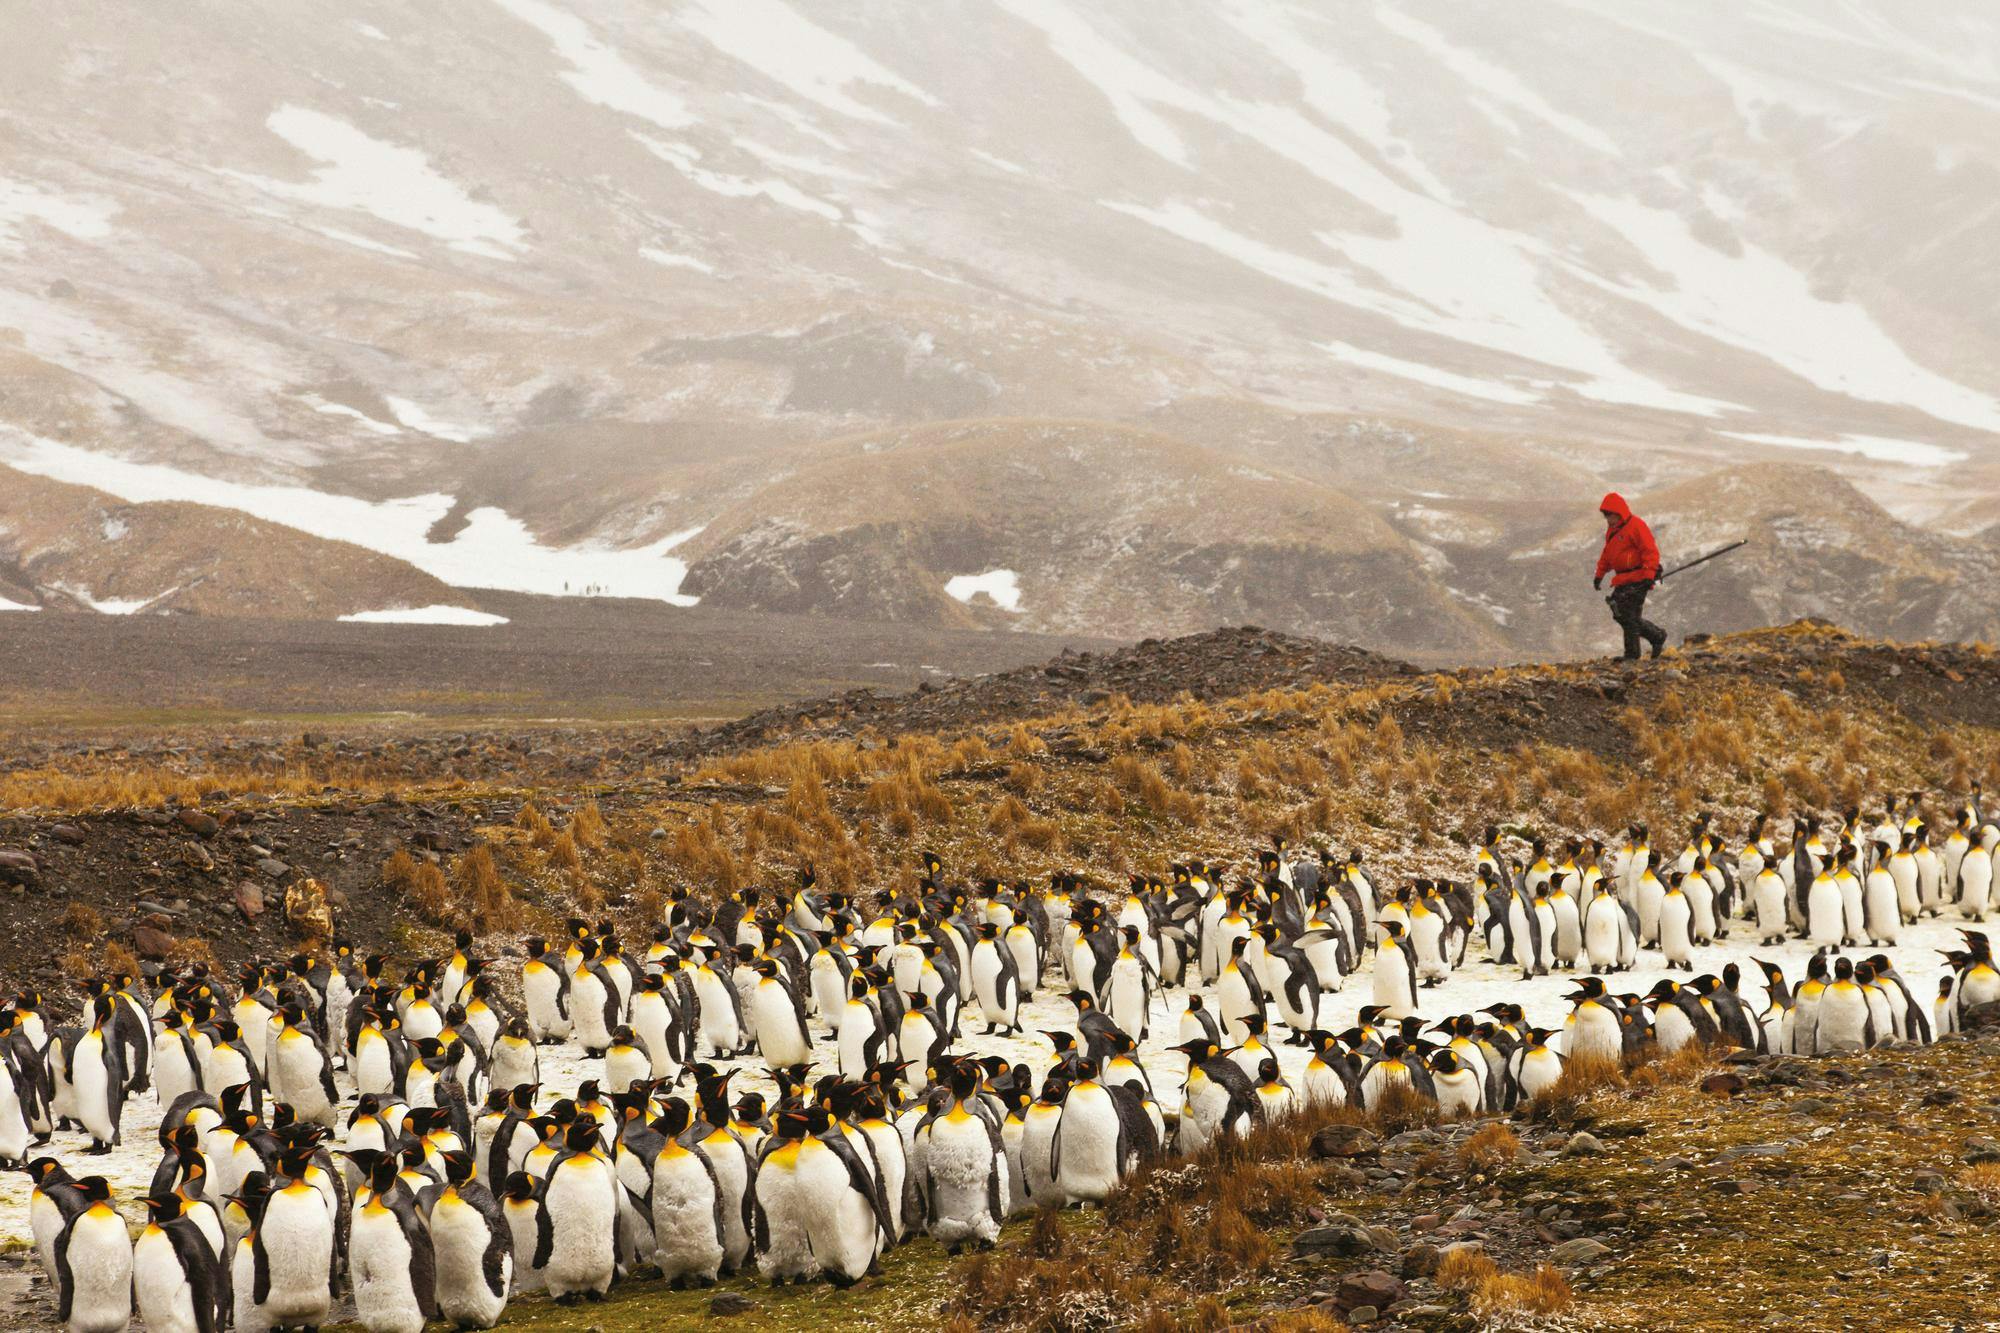 A guest walking to take photos of King penguins in Fortuna Bay, South Georgia Island.